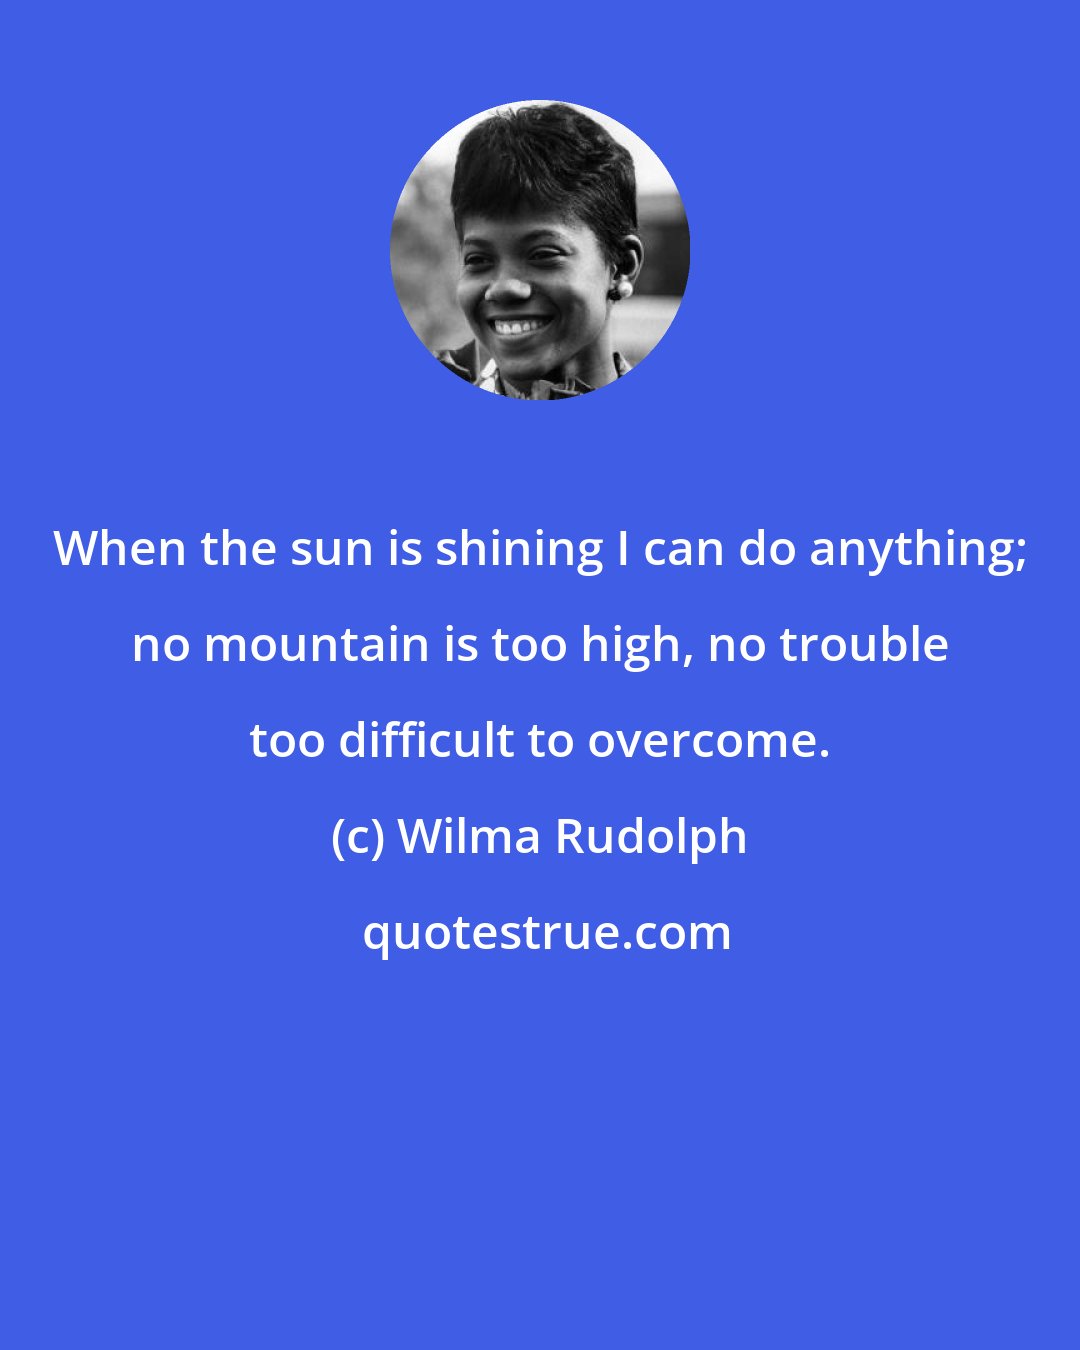 Wilma Rudolph: When the sun is shining I can do anything; no mountain is too high, no trouble too difficult to overcome.